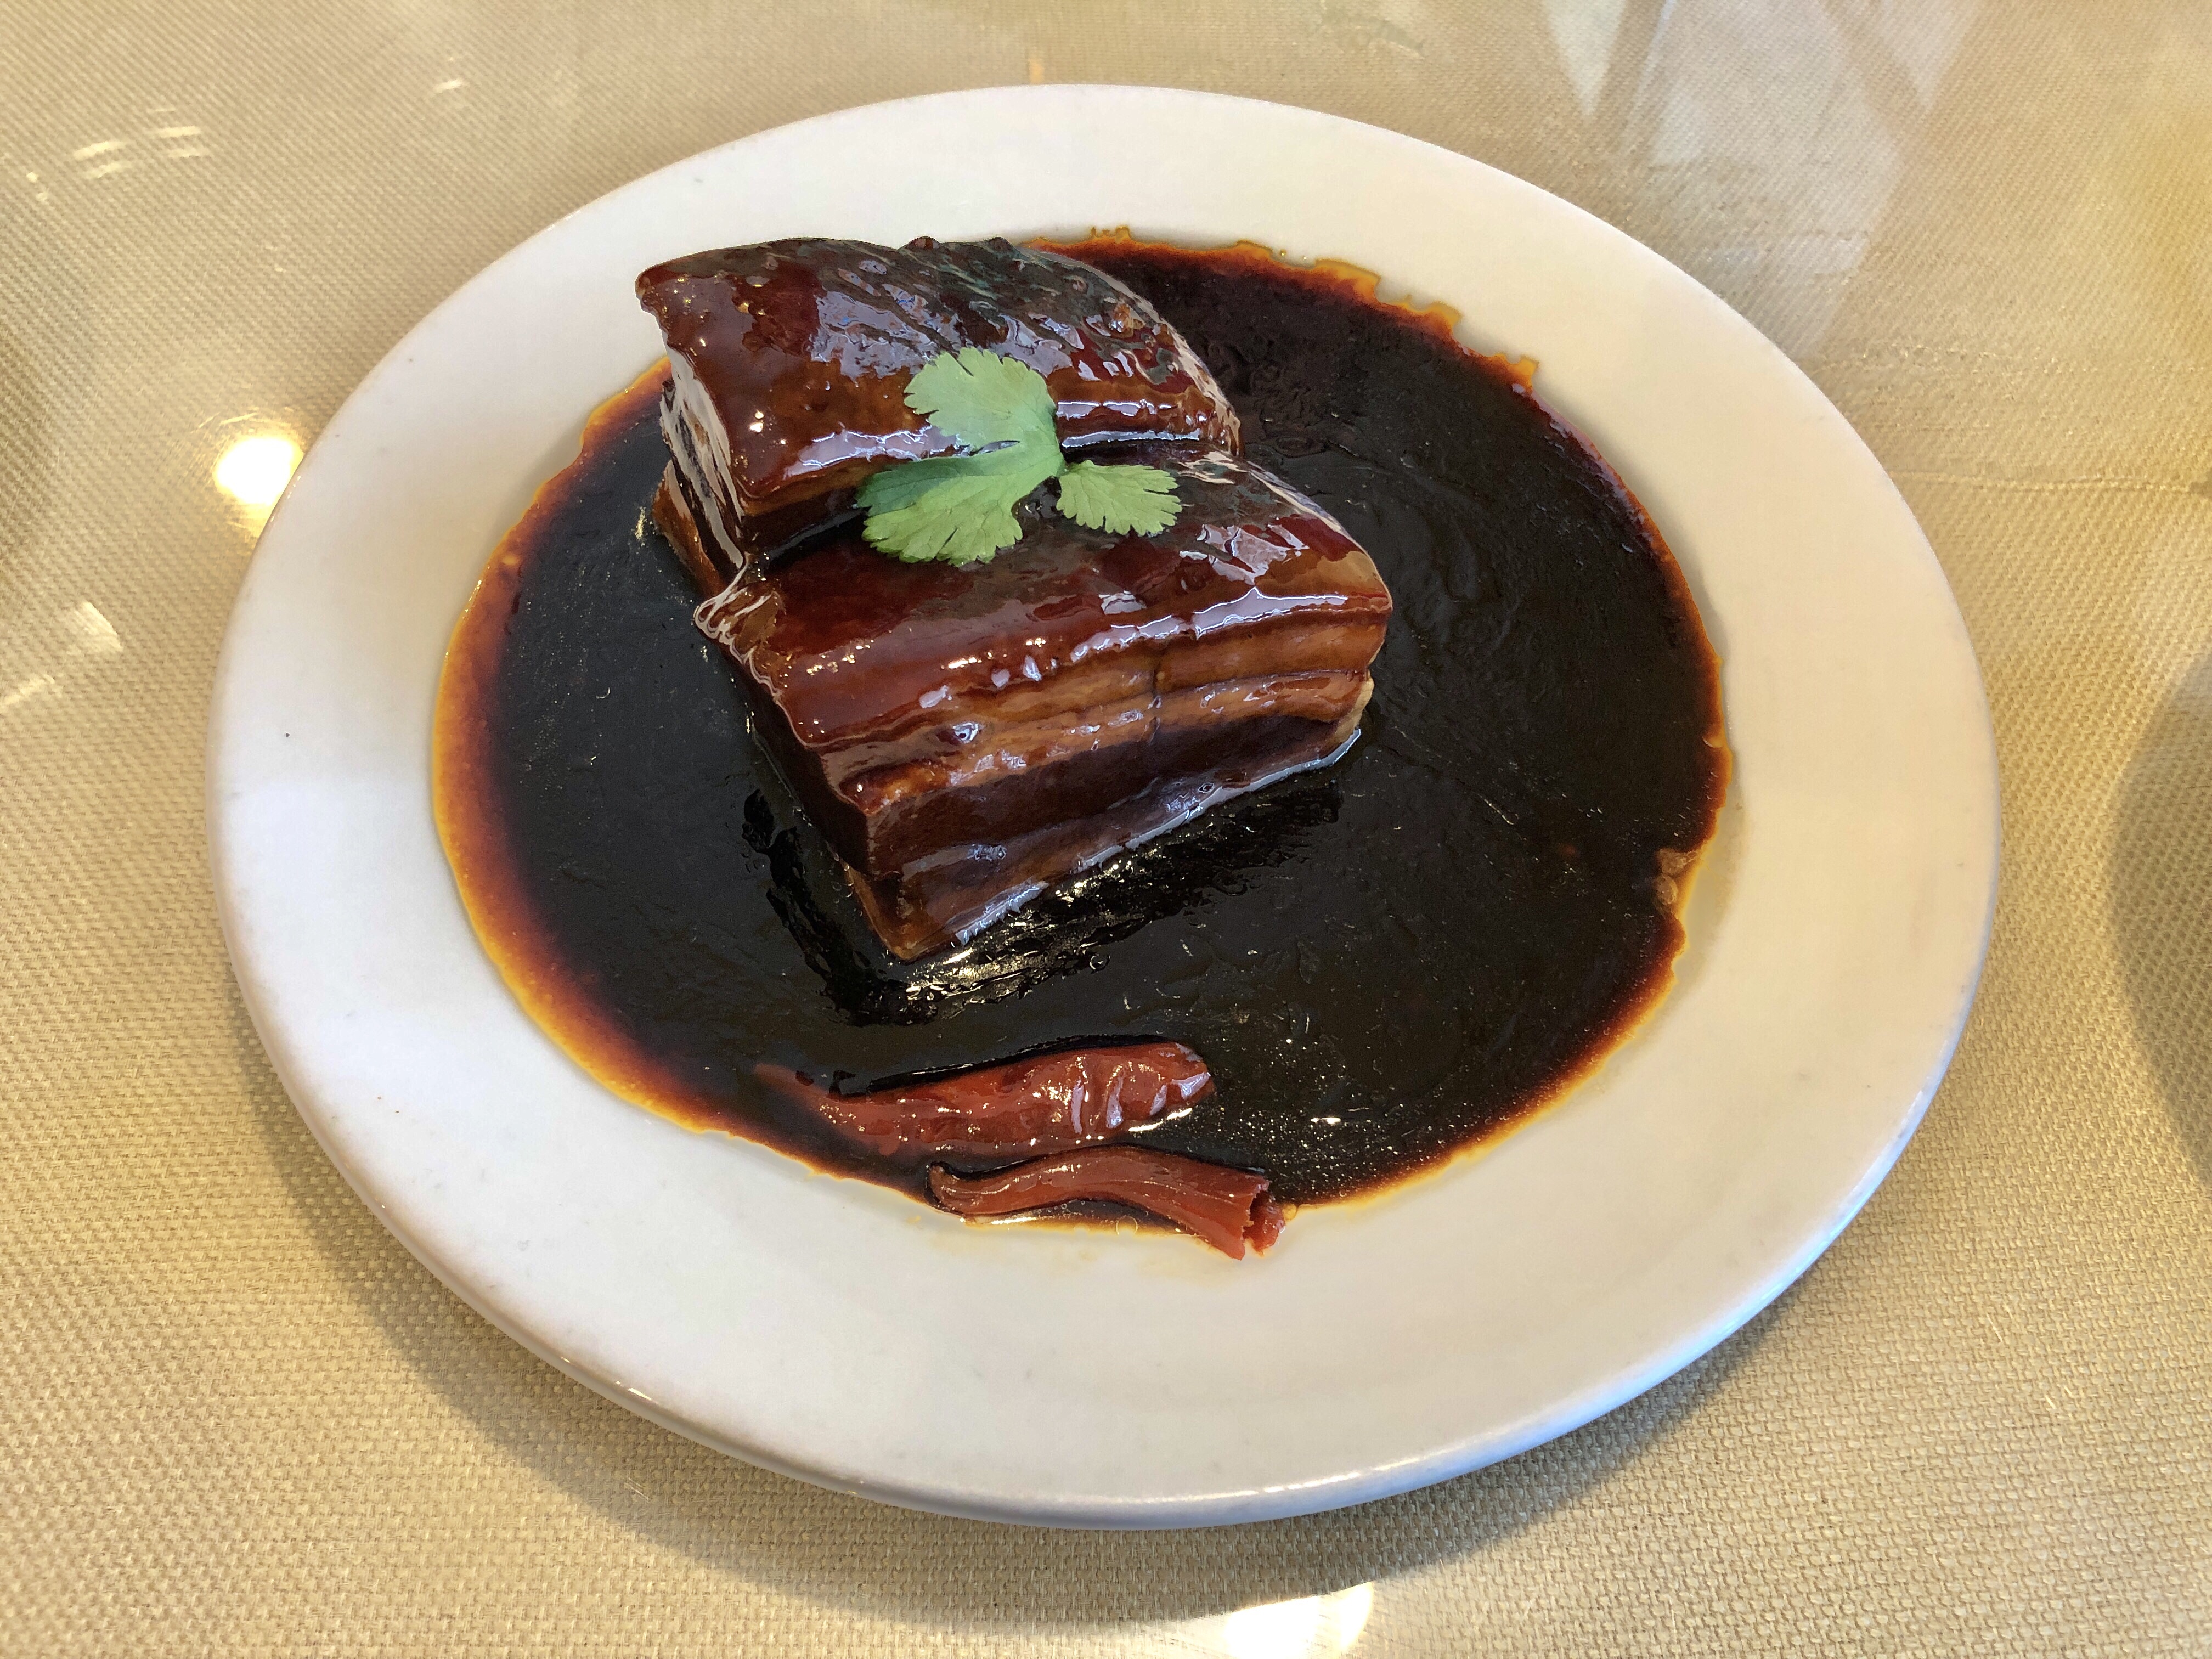 Dong Po Pork, braised pork belly in an ethereal brown sauce at Masterpiece in Duluth, Georgia